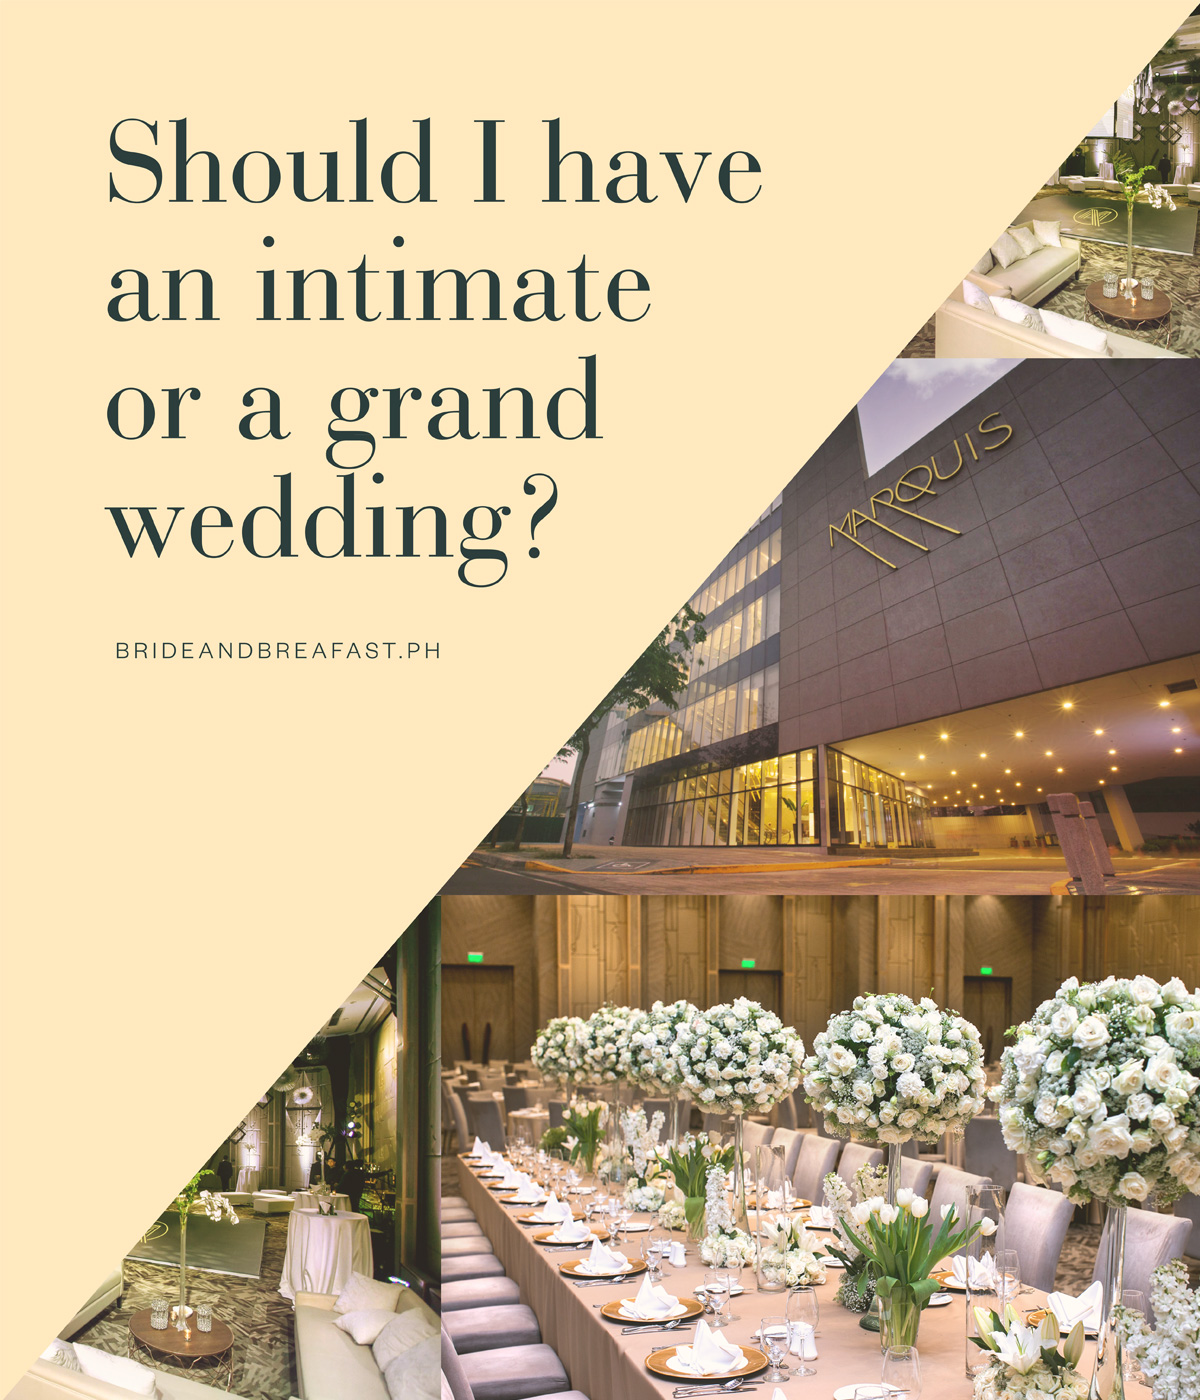 Should I have an intimate or grand wedding?